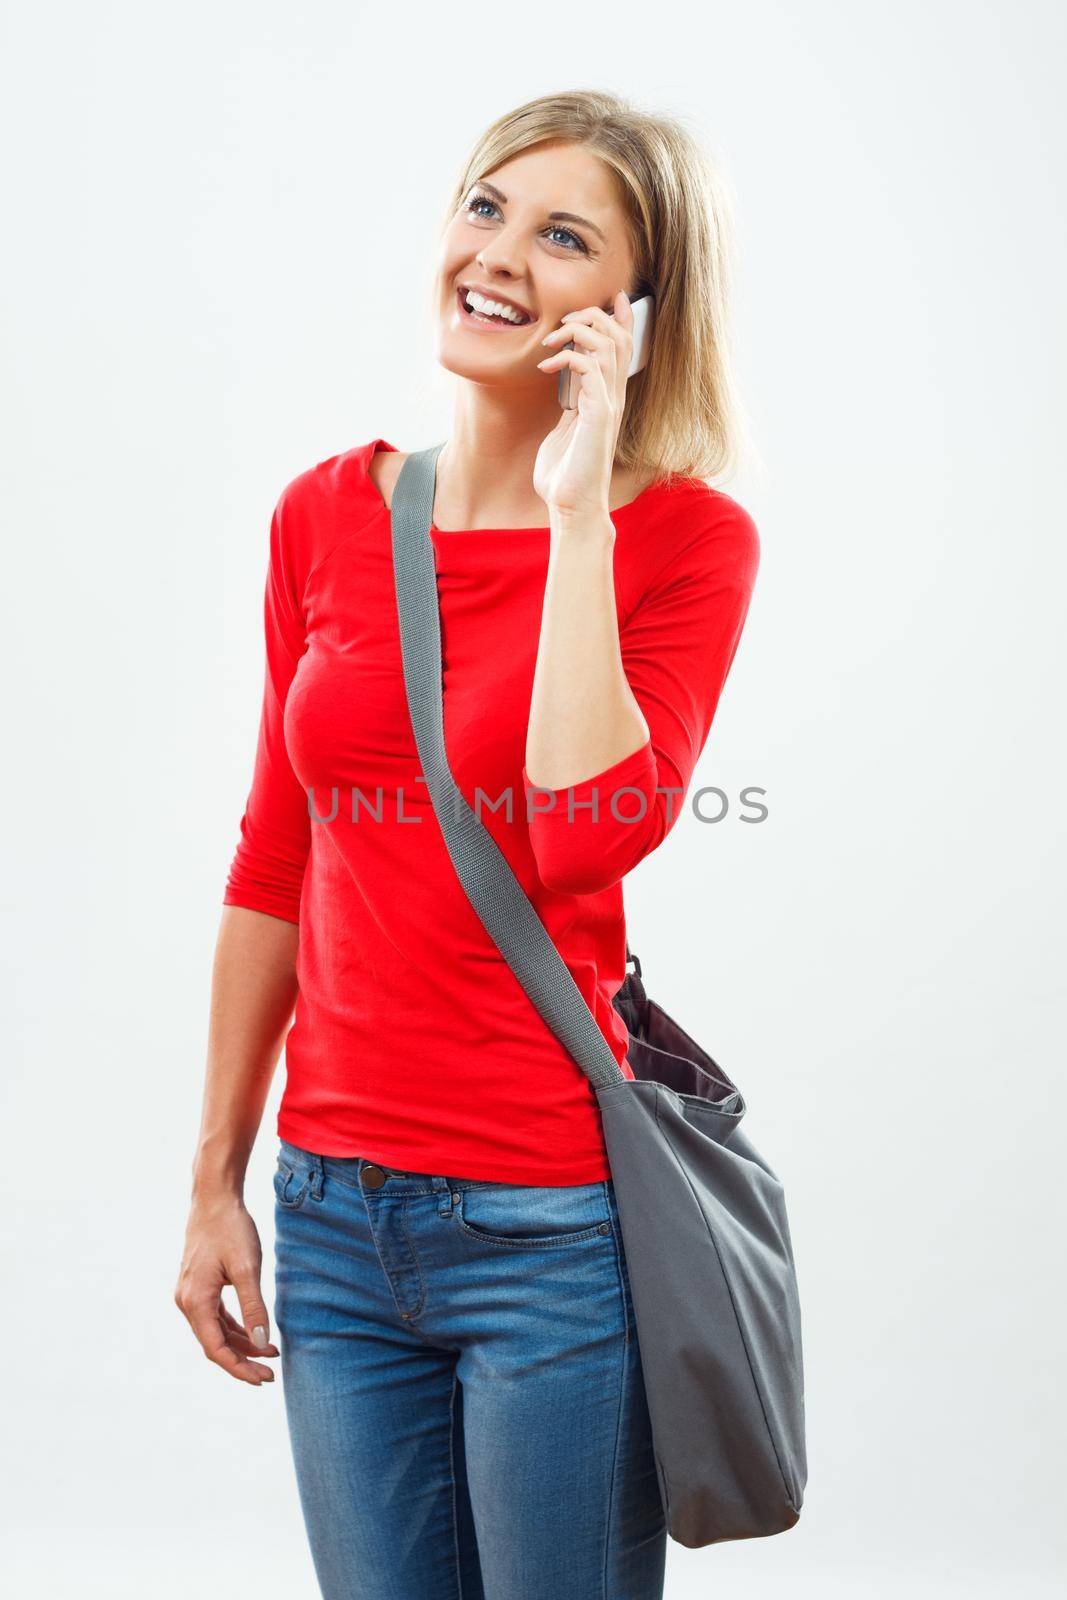 Female student talking on the phone